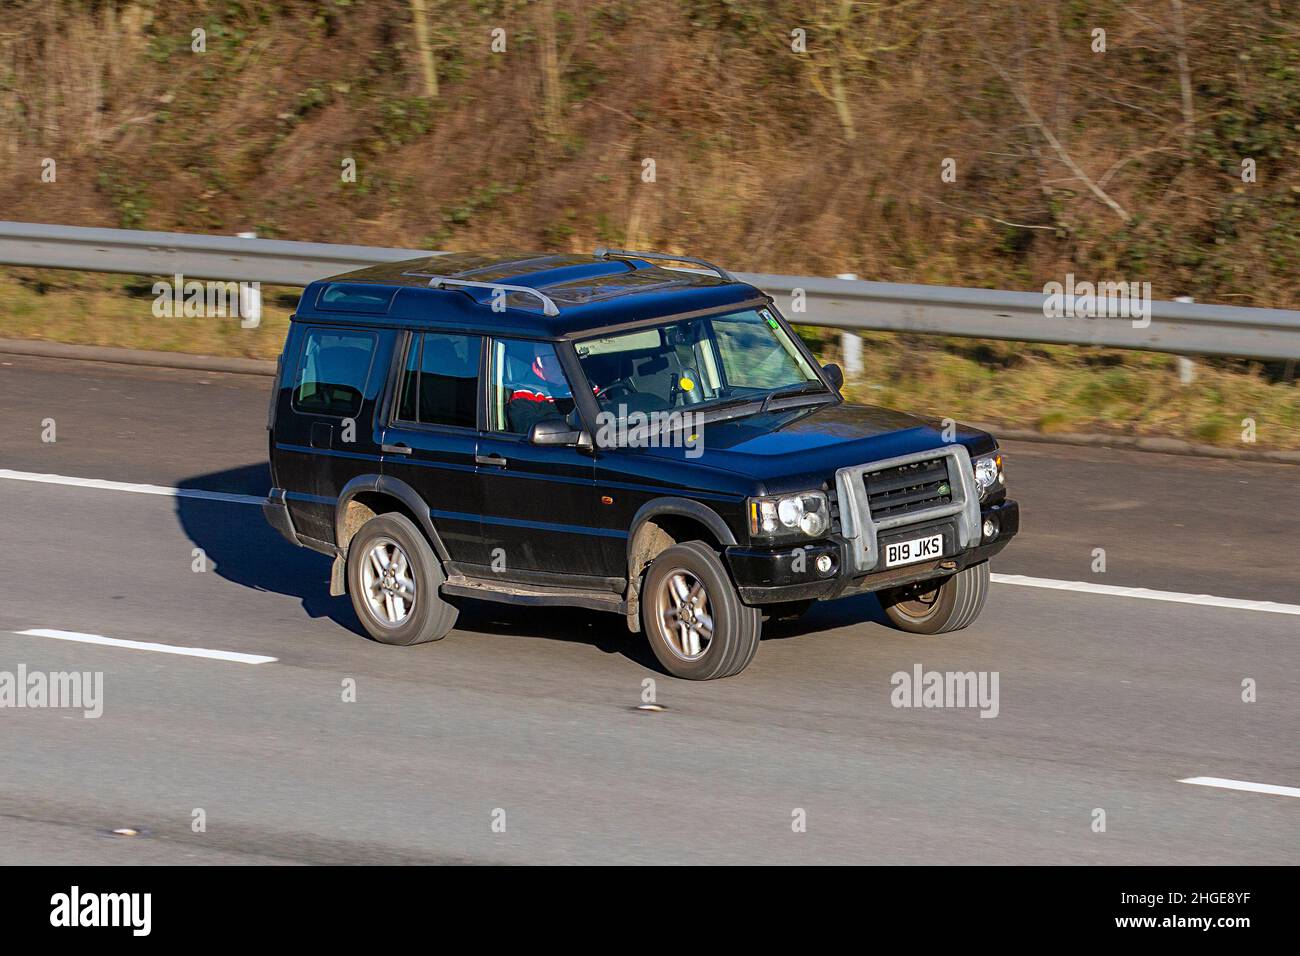 2003 black Land Rover Discovery 2495cc Diesel 5 speed H Vehicular traffic, moving vehicles, cars, vehicle driving on UK roads, motors, motoring on the M61 motorway highway UK road network. Stock Photo